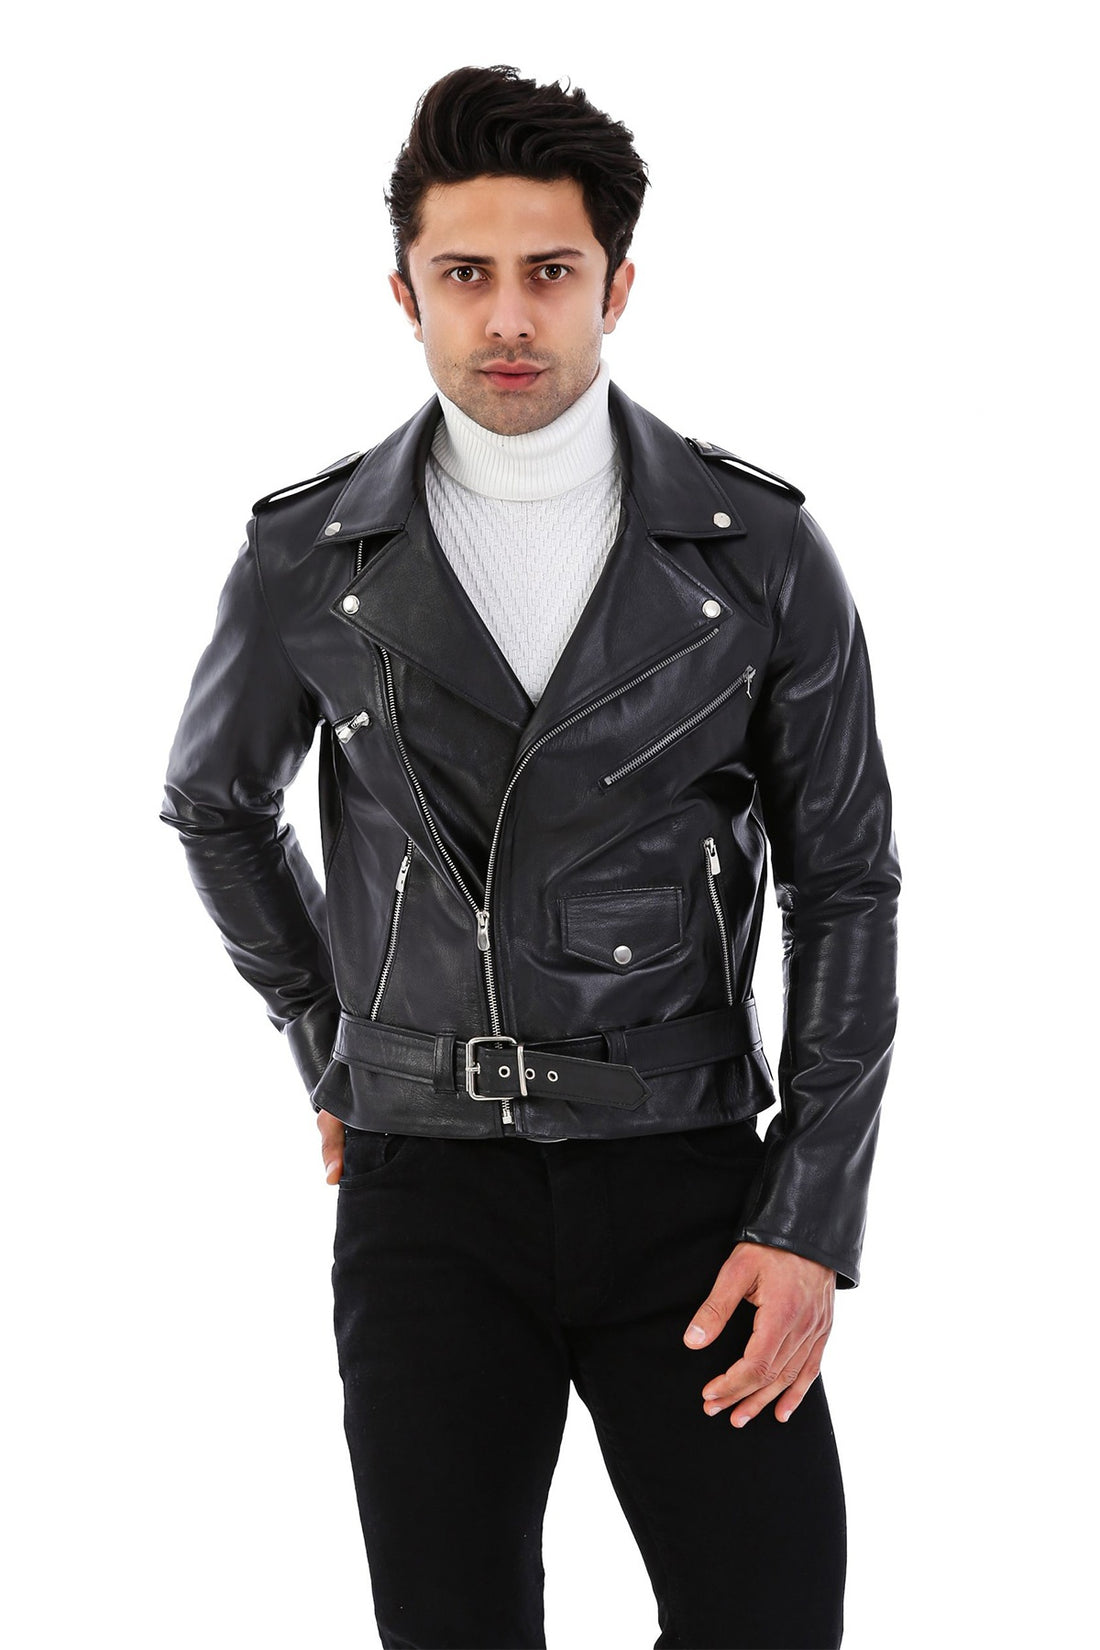 Best Leather Care Tips to Keep Your Biker Jacket Looking New